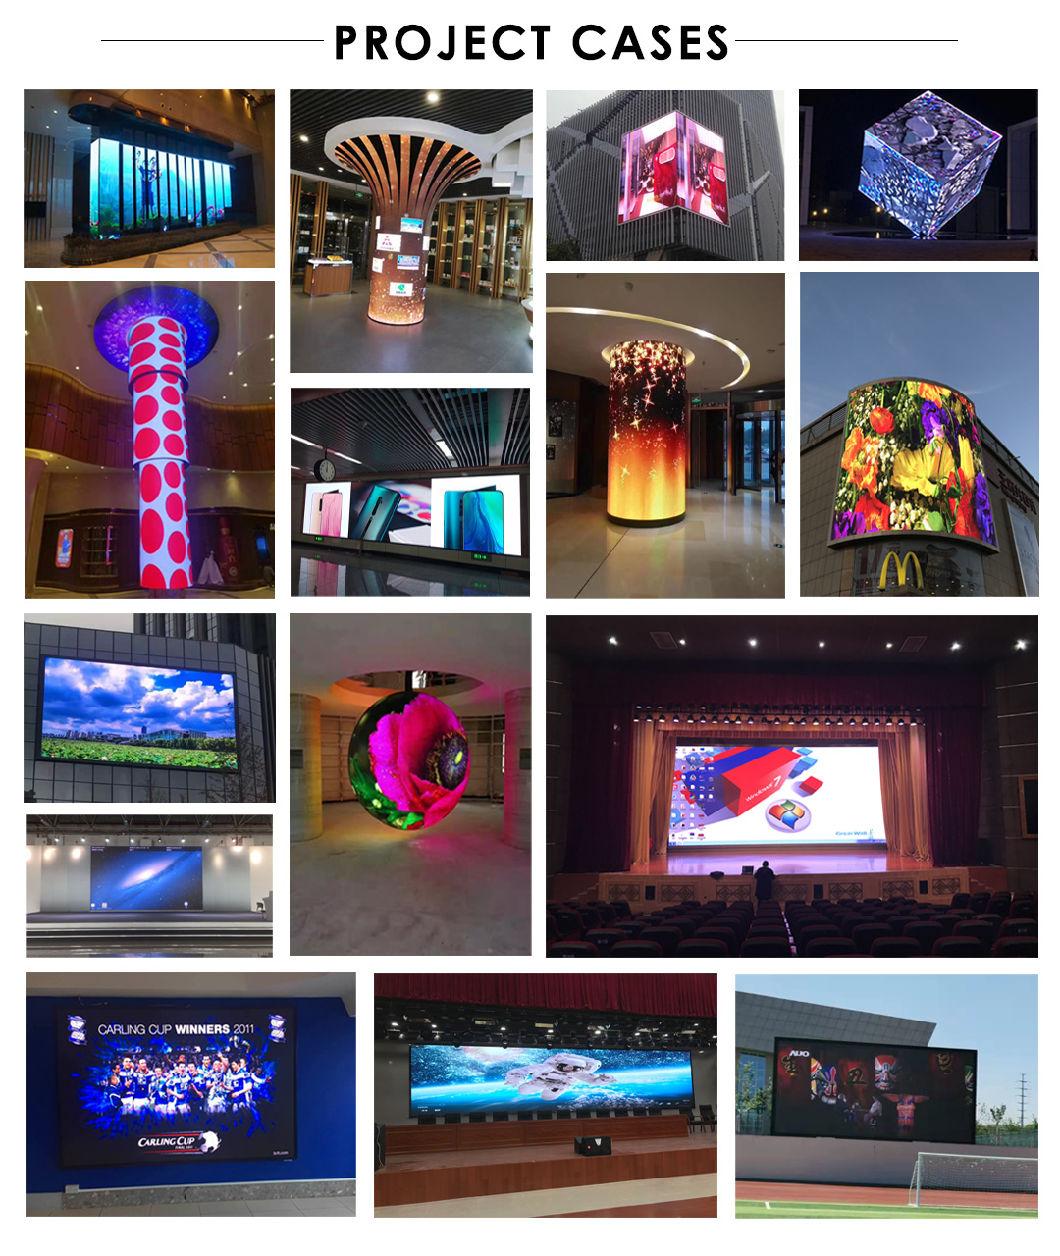 1r1g1b Full Color Transparent LED Display Advertising Video Screen of P3.91-7.81 with Cabinet